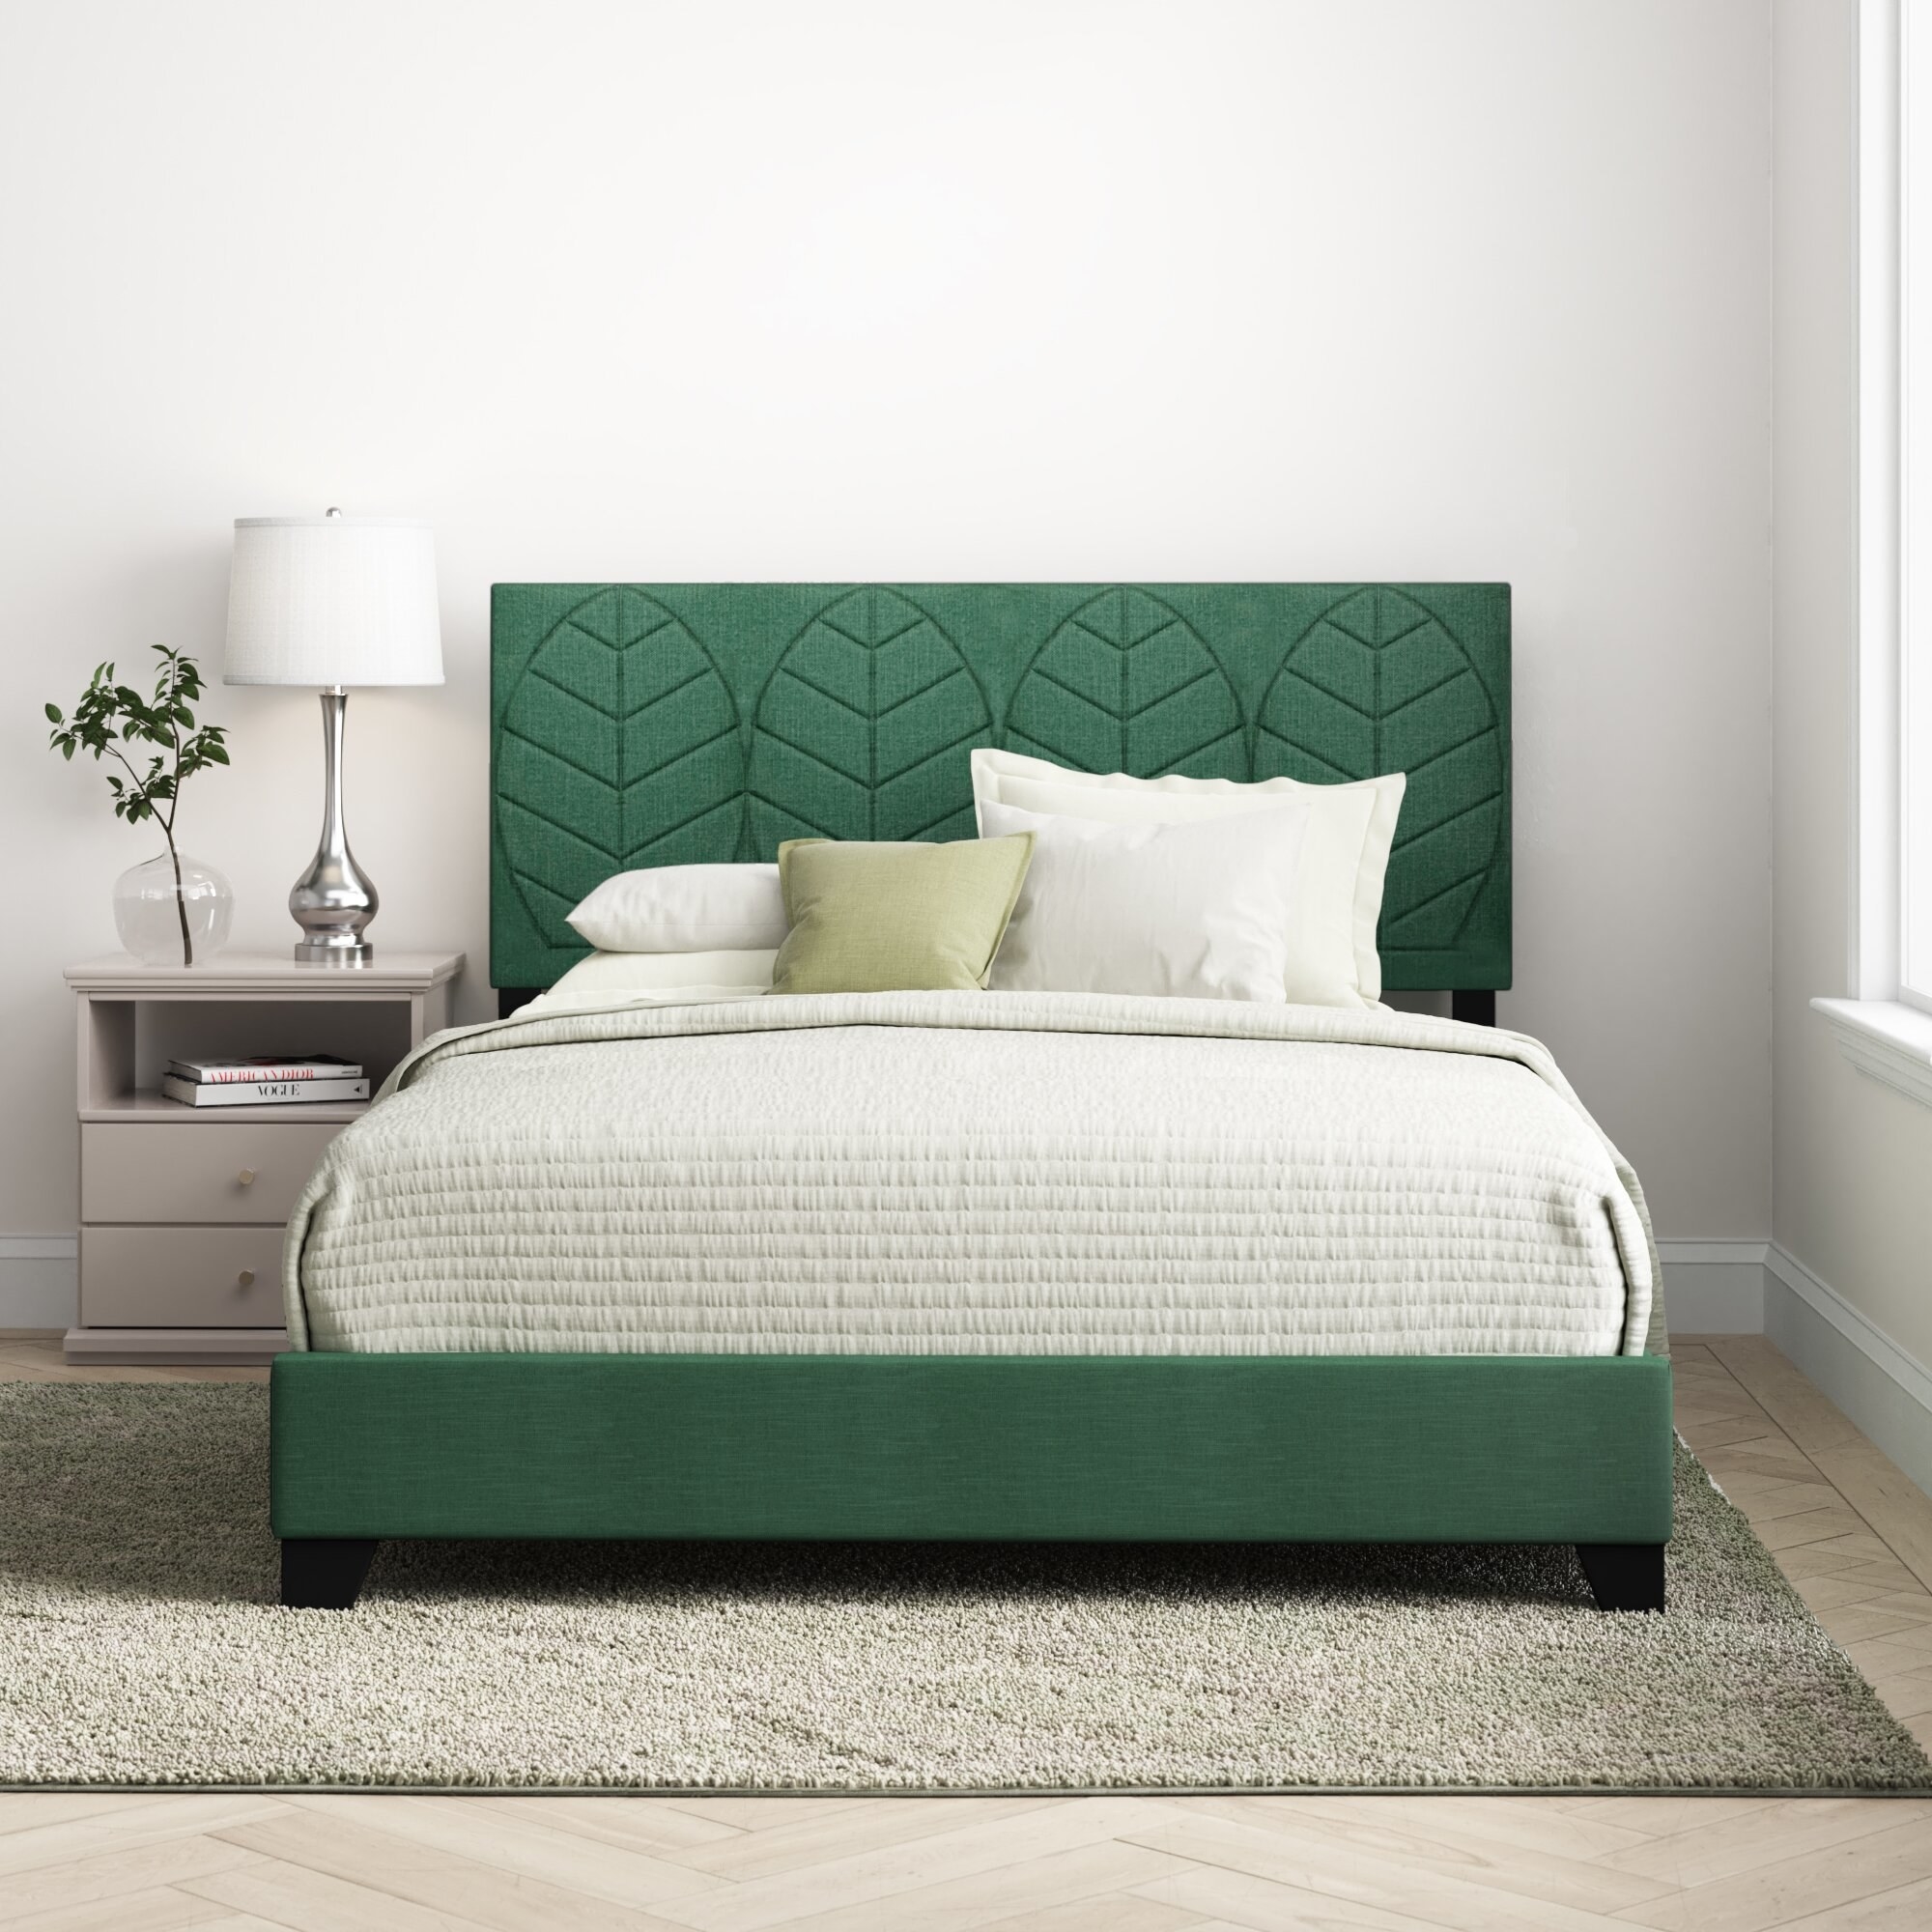 A green bed with a leaf pattern on the headboard in a bedroom.